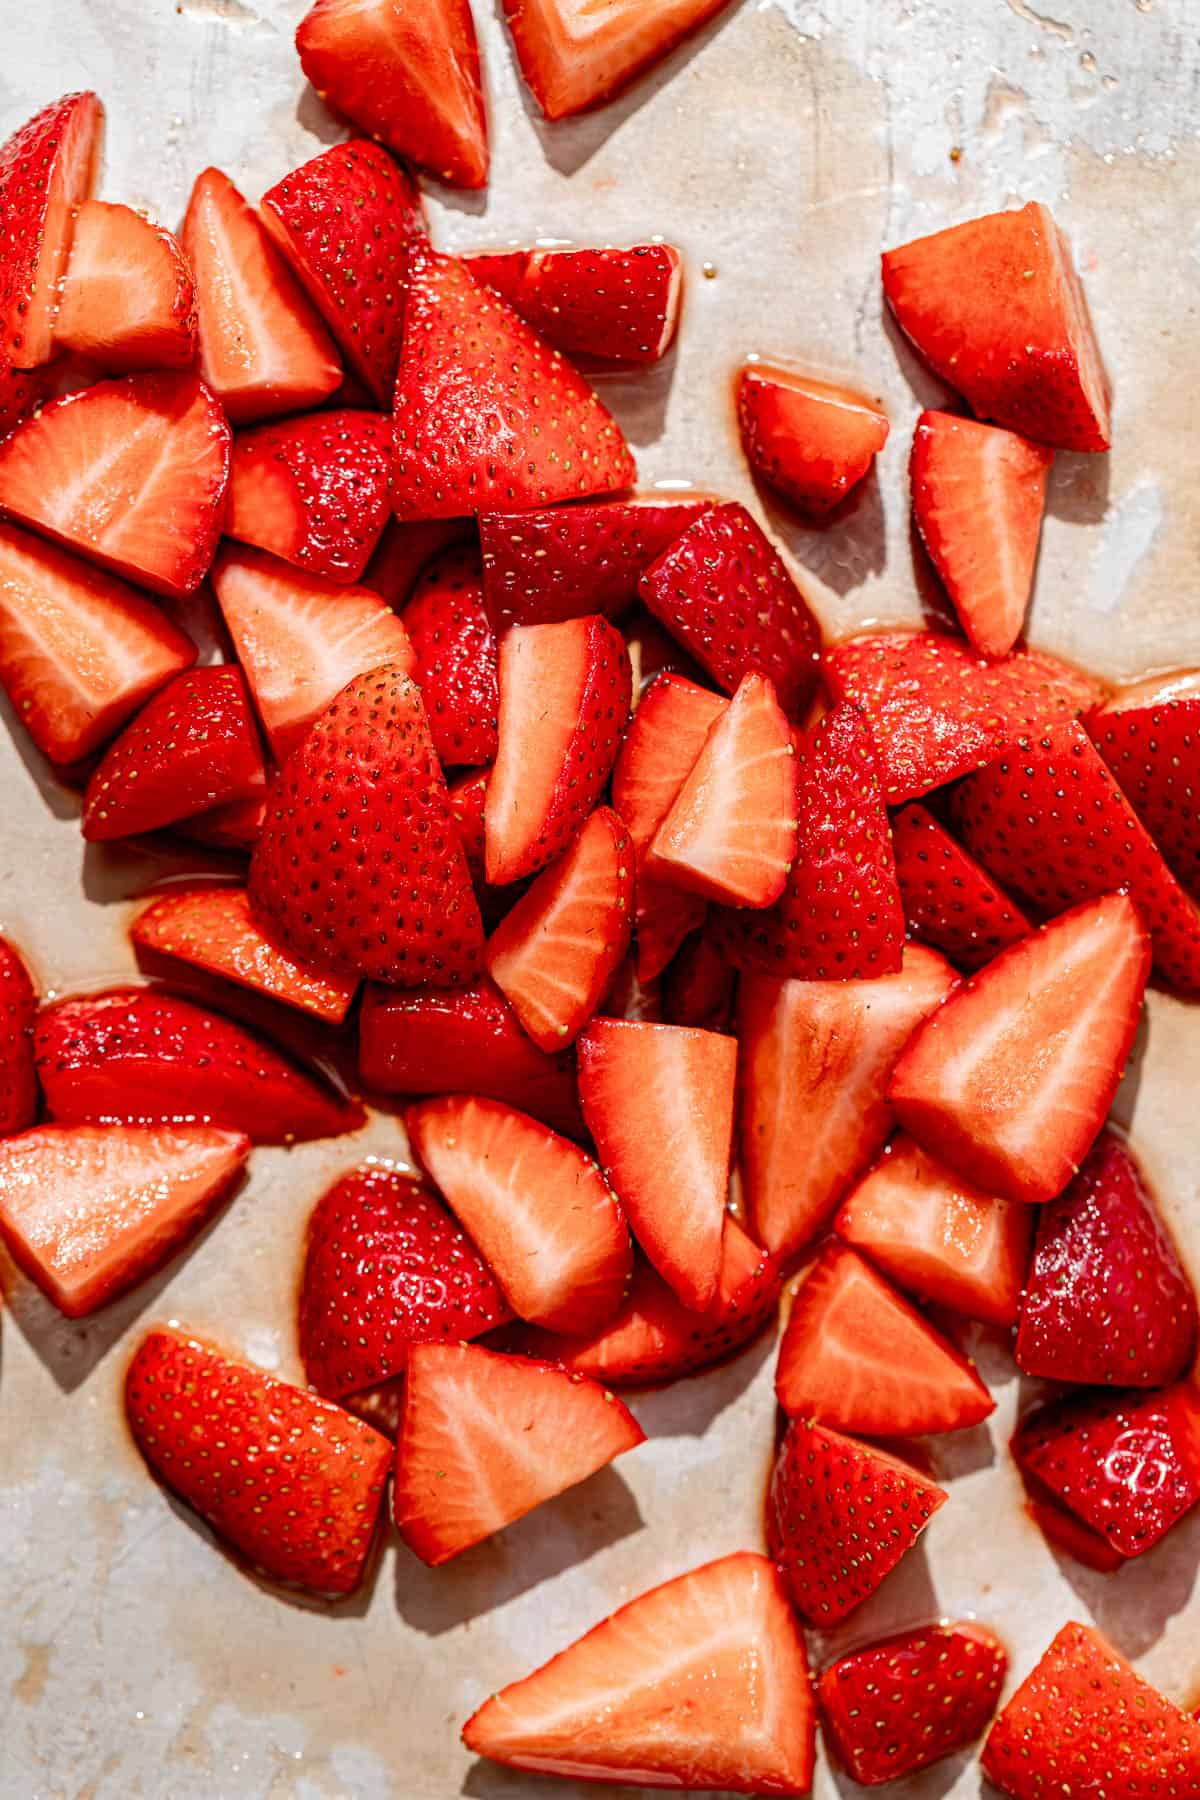 cut strawberries laying on a baking tray.